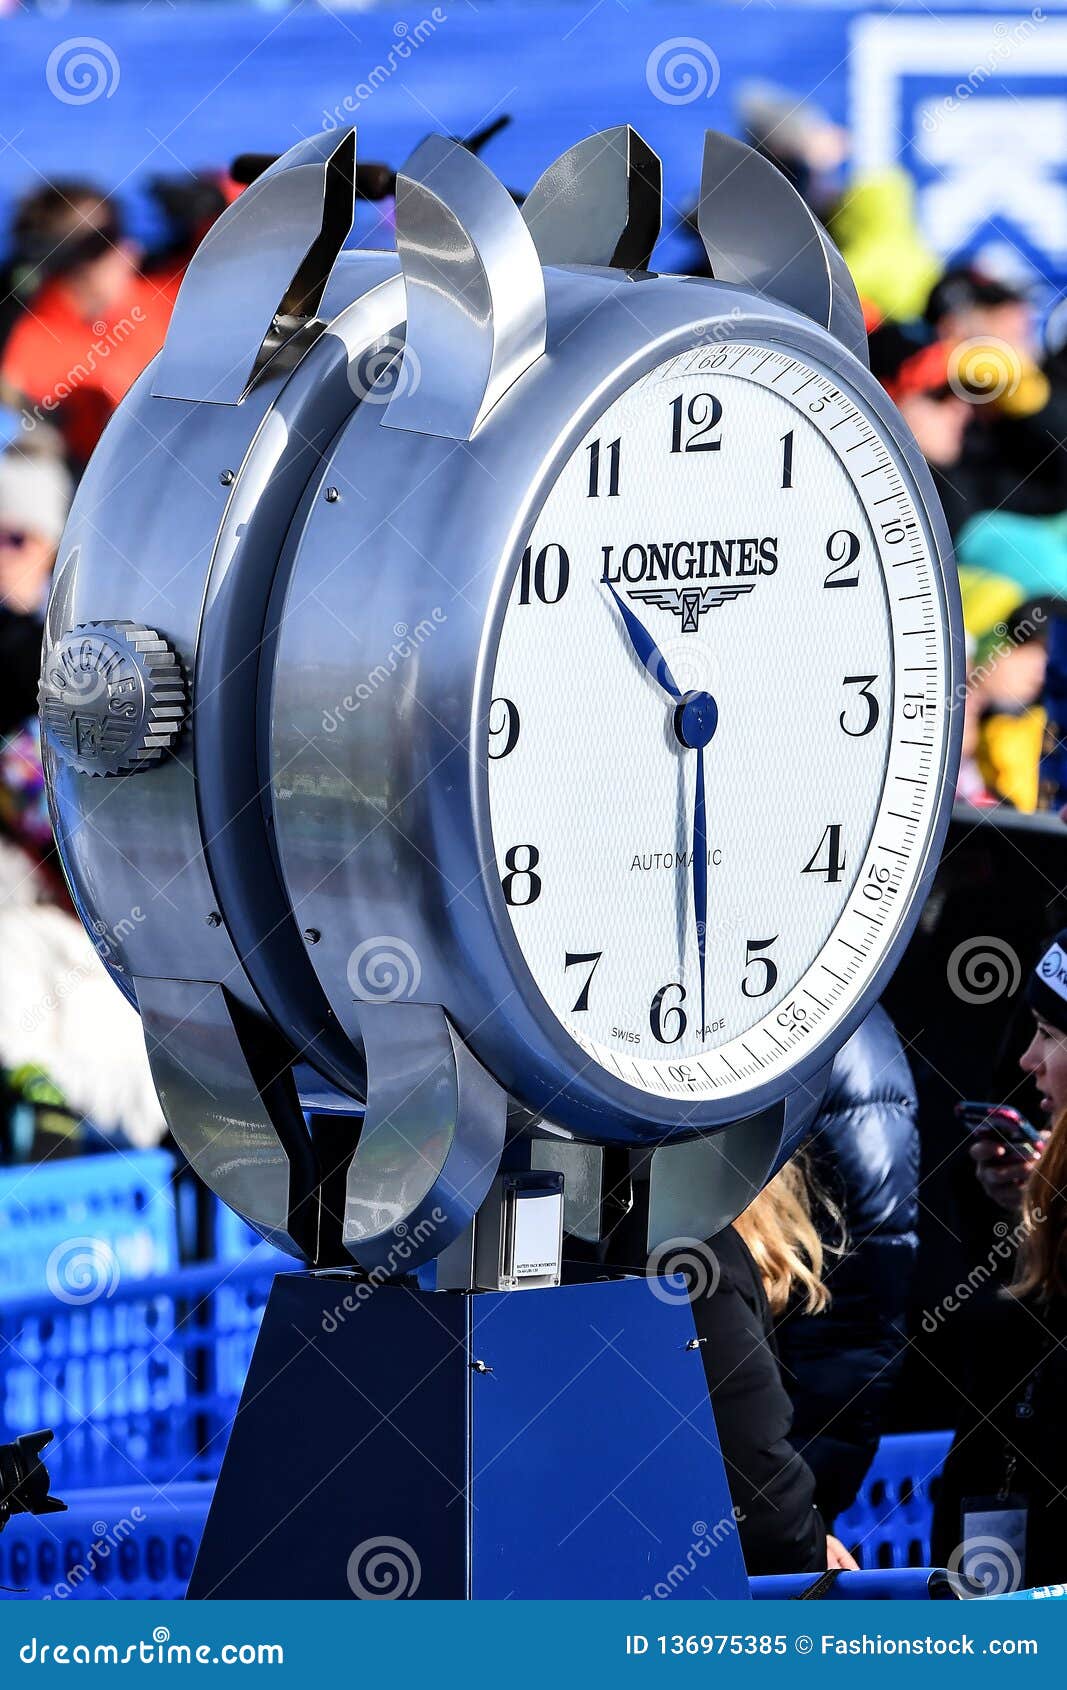 A General View of Longiness Watch during the Audi FIS Alpine Ski World Cup Women`s Giant Slalom Editorial Image